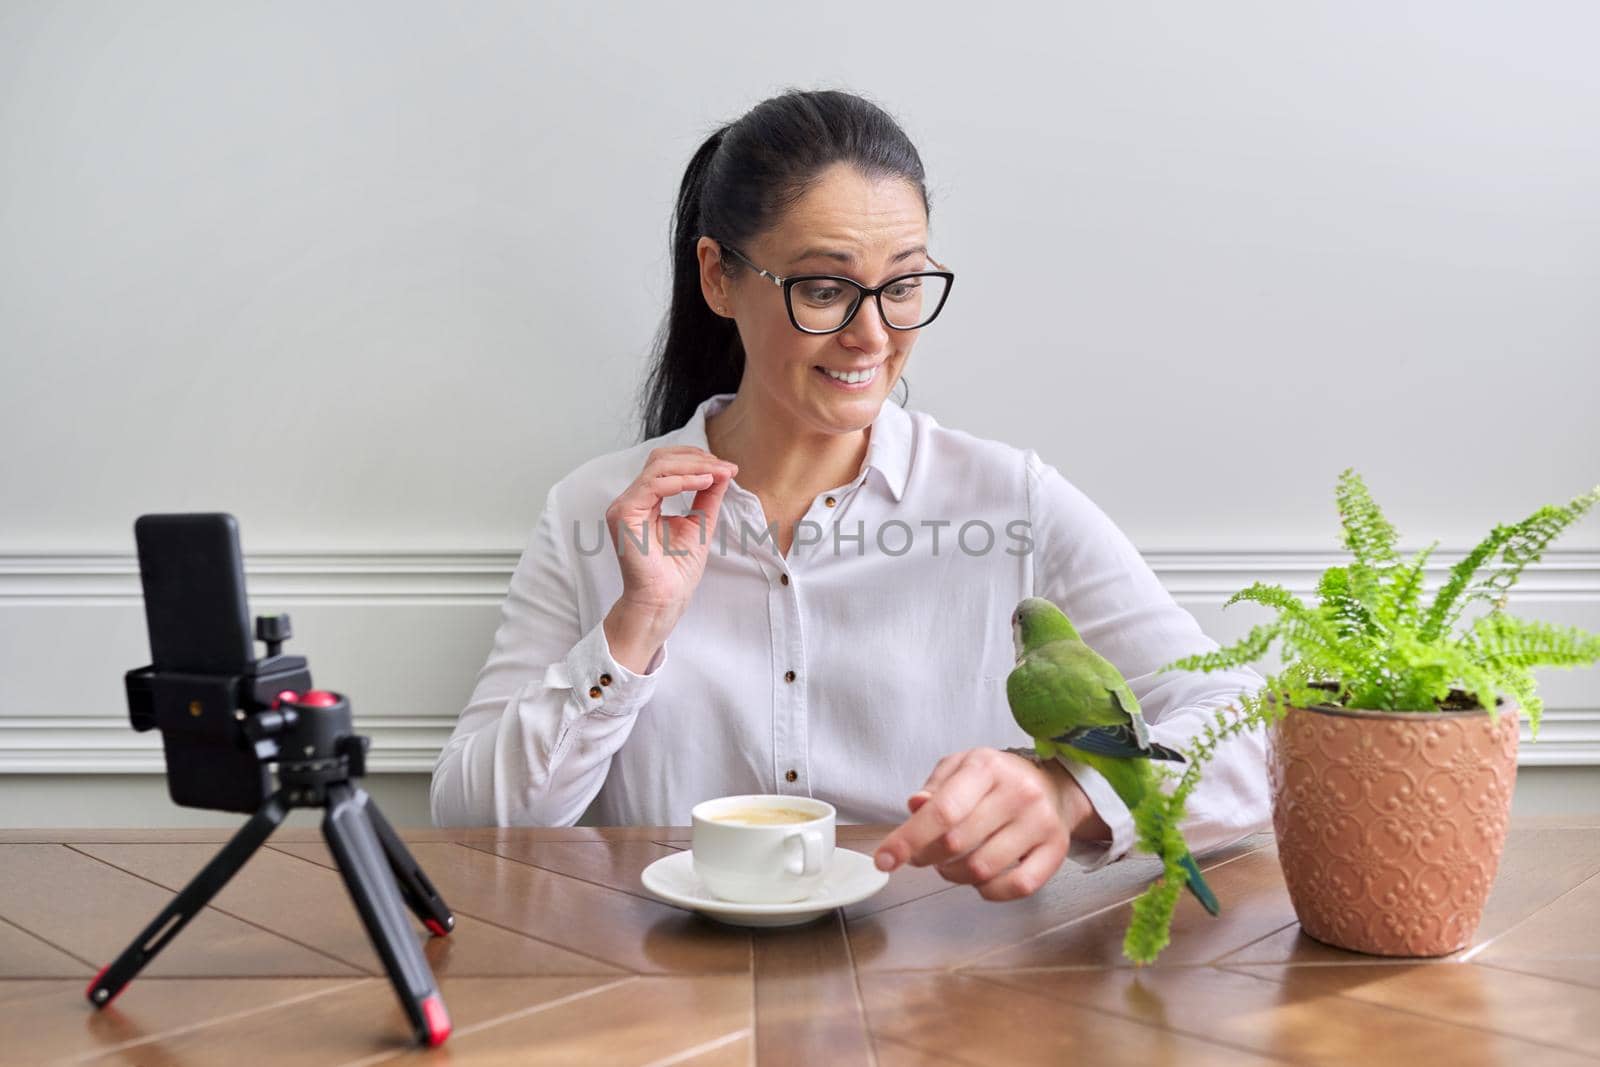 Woman recording video stream on smartphone playing with pet green quaker parrot, female ornithologist blogger vlogger talking to bird talking about parrot grooming lifestyle and nutrition